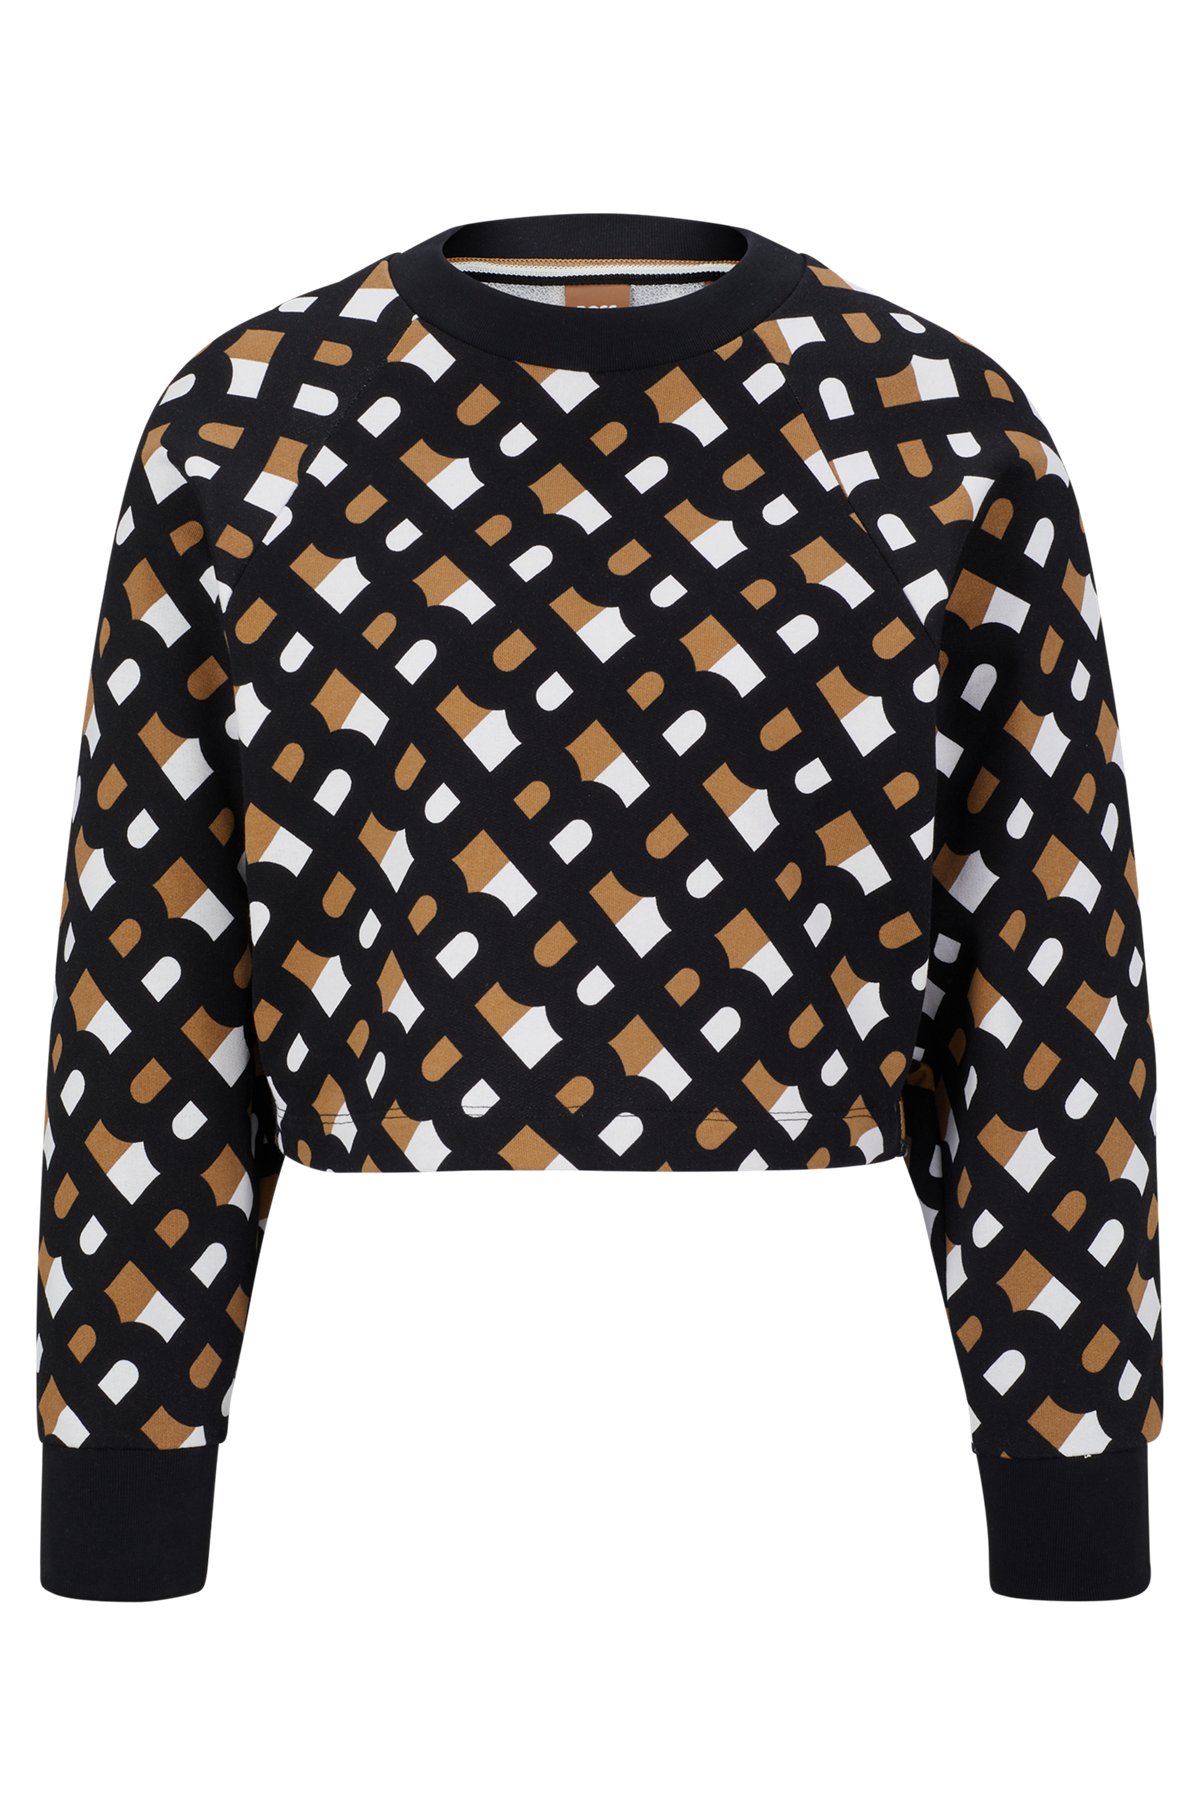 Monogram sweatshirt in French terry with batwing sleeves , Patterned